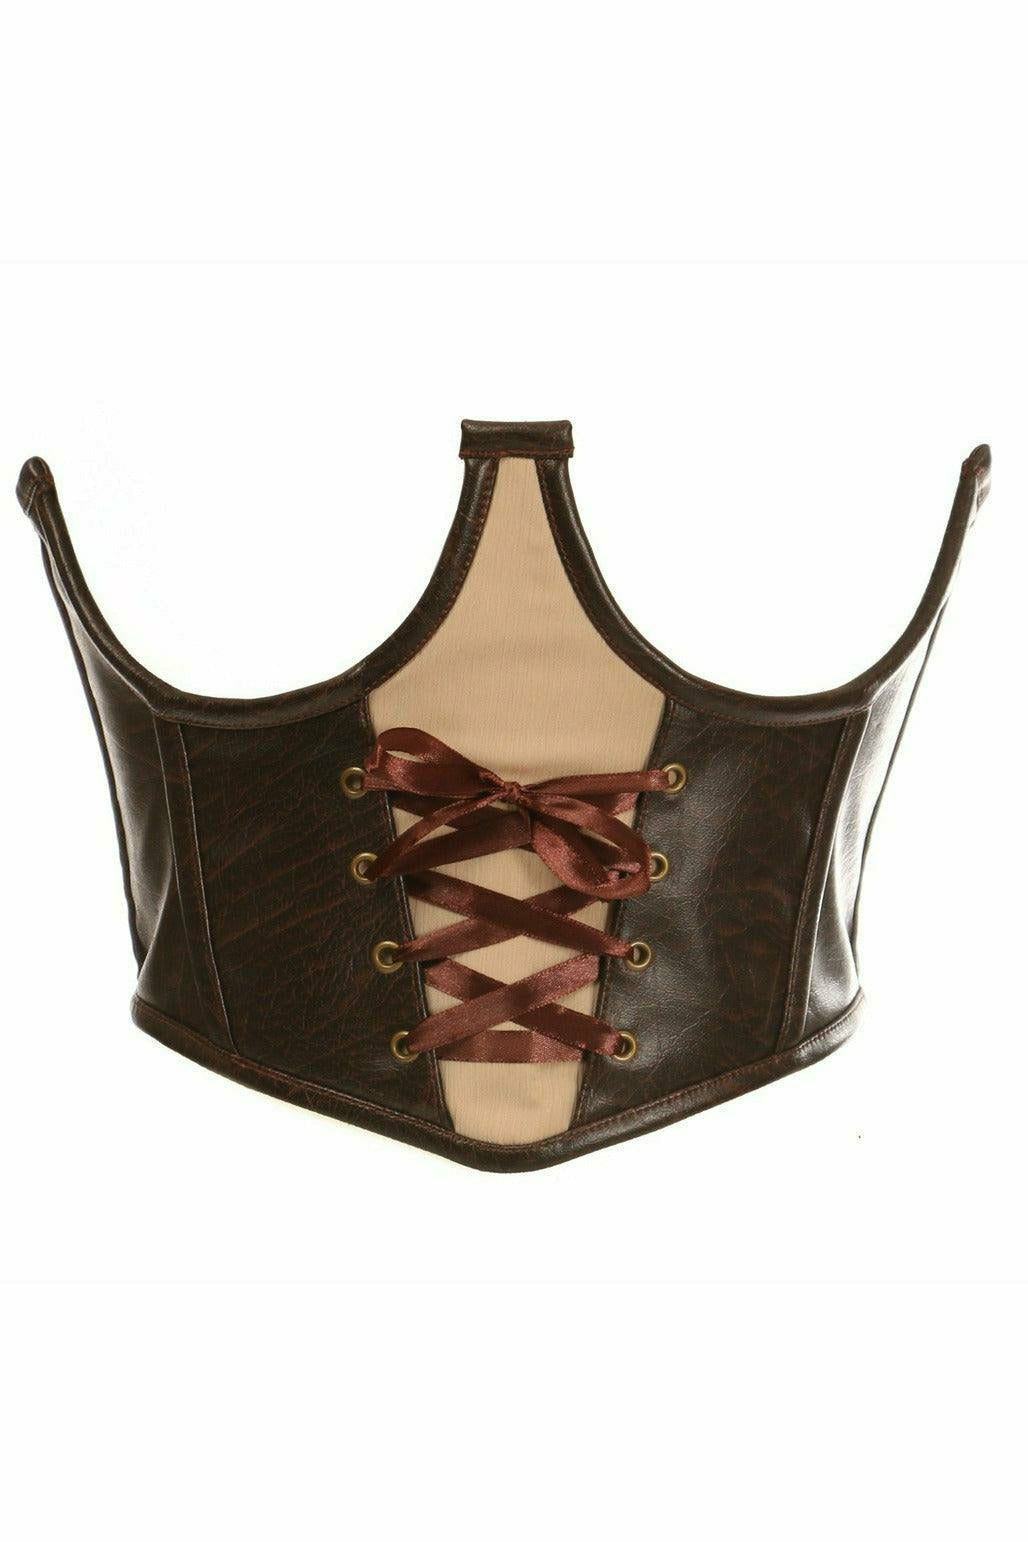 Top Drawer Faux Leather Steel Boned Lace-Up Open Cup Waist Cincher - Daisy Corsets